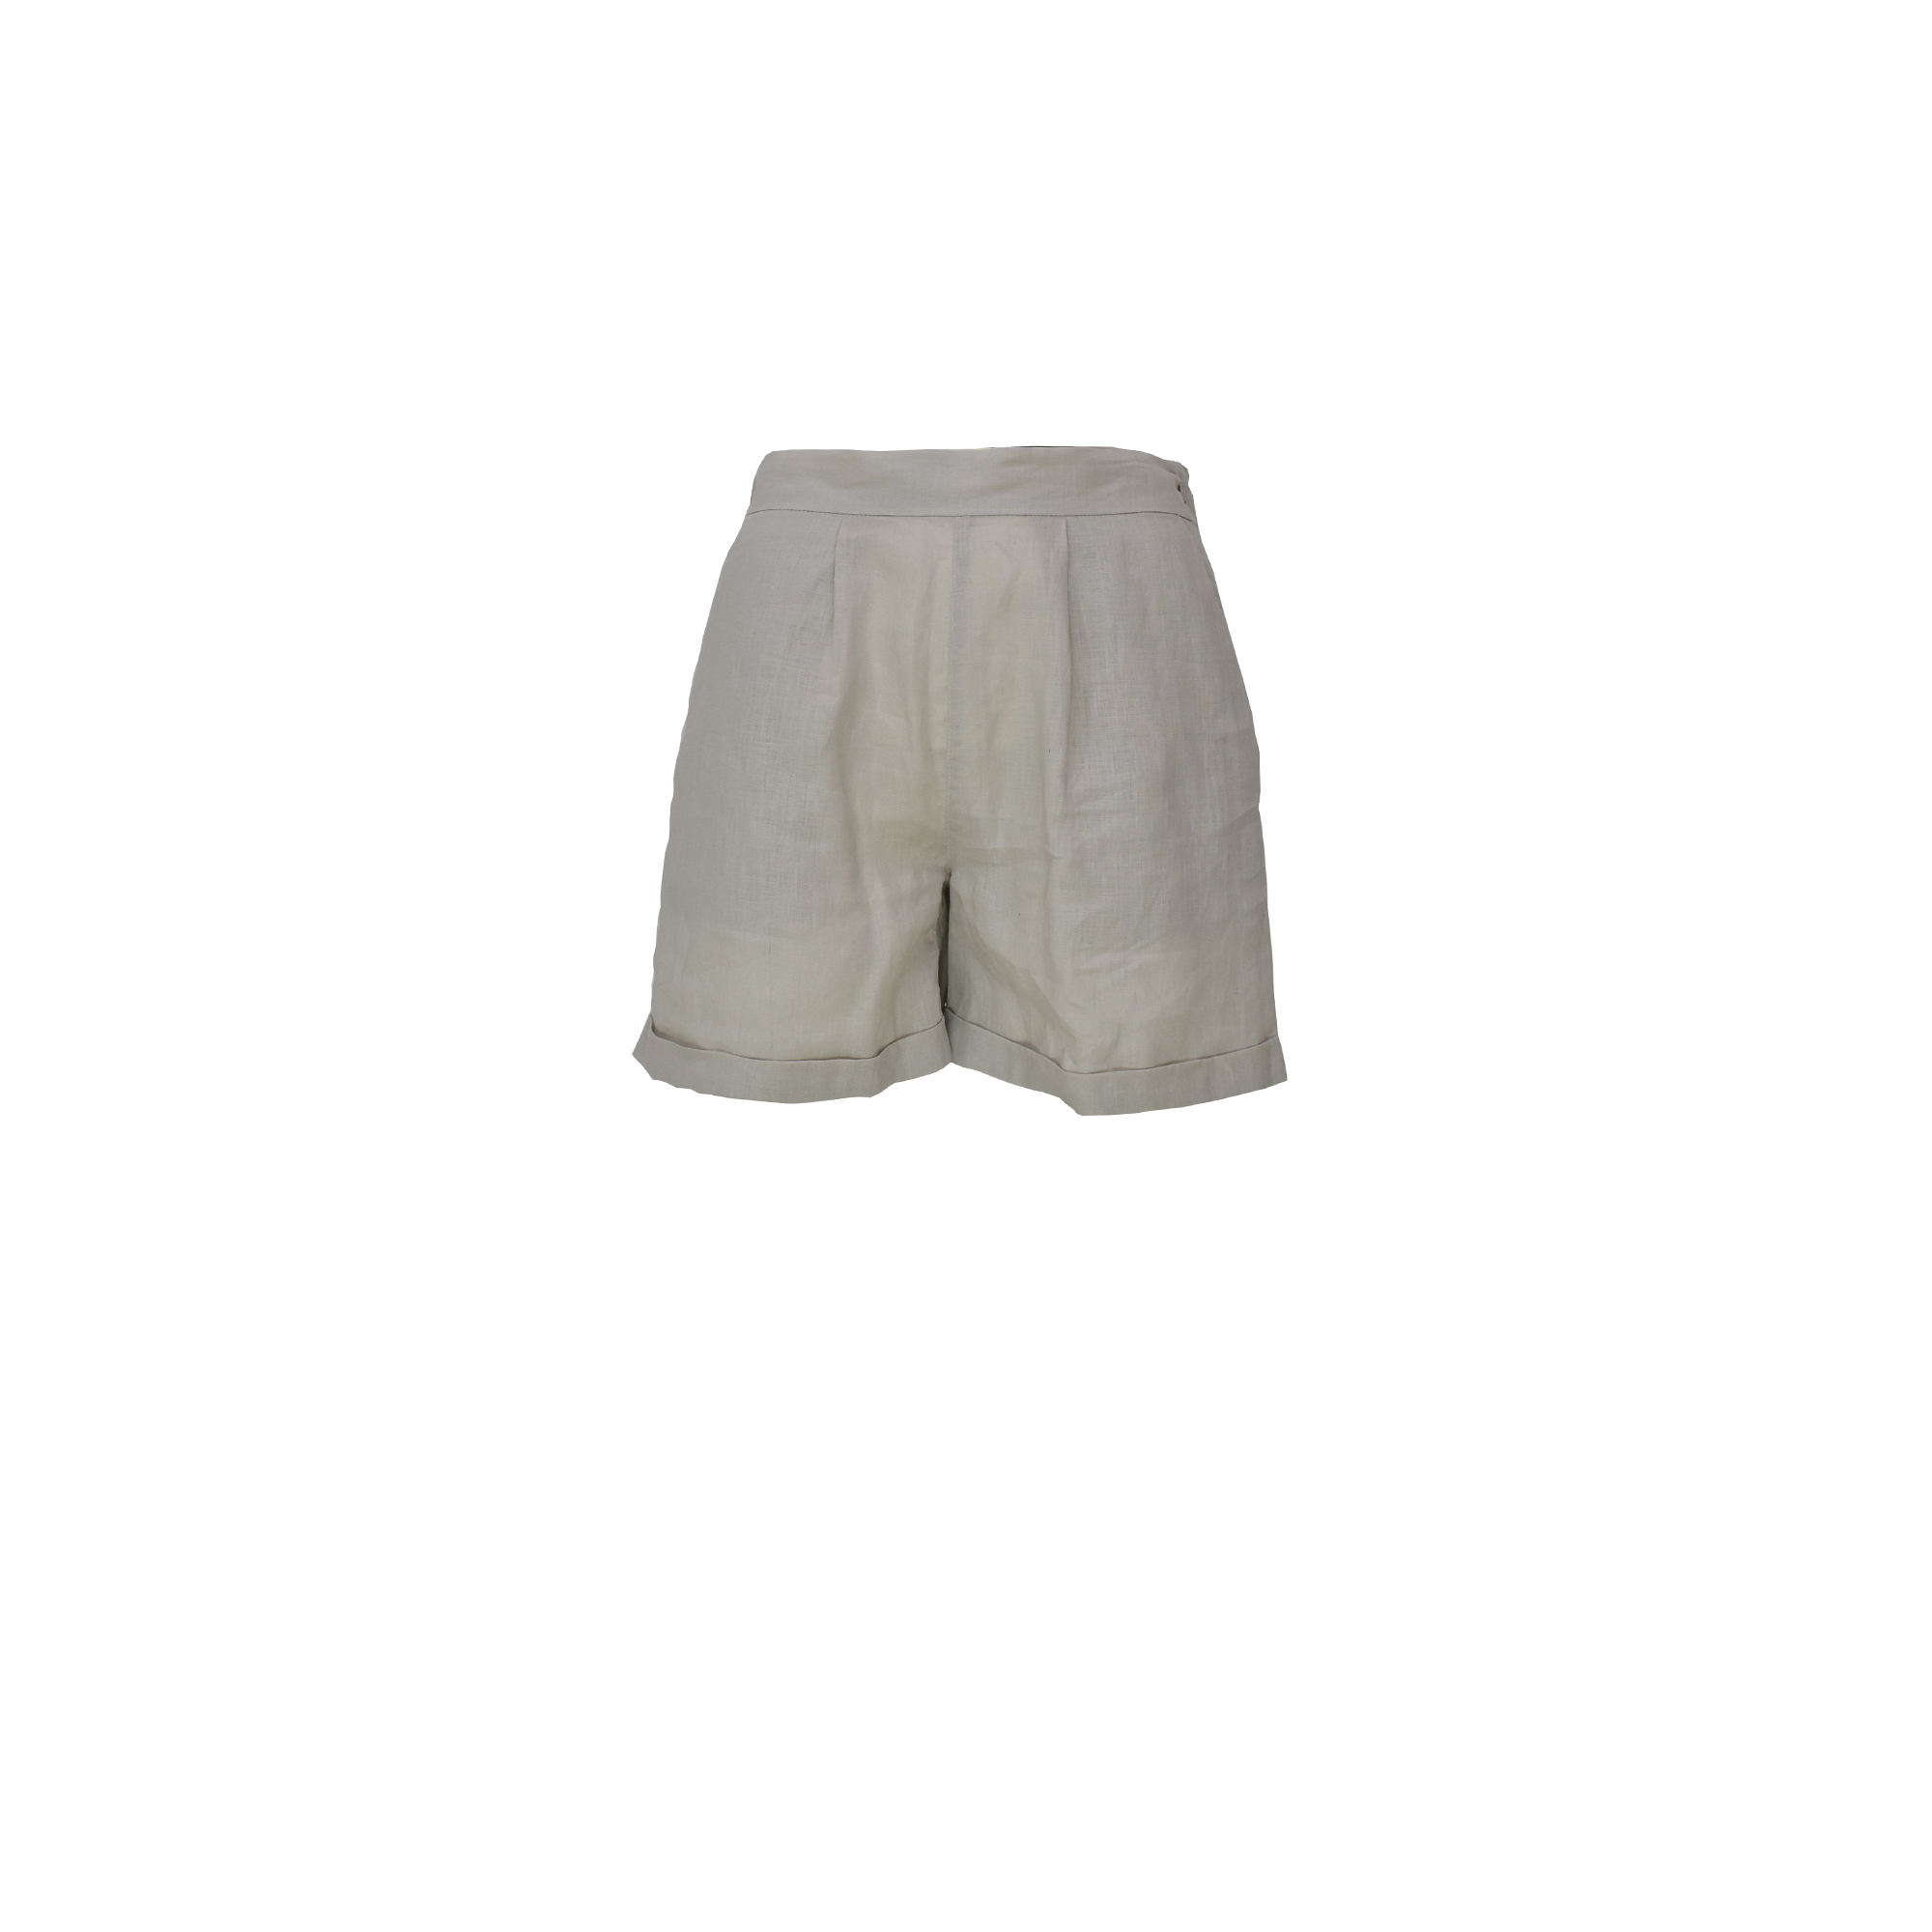 5PREVIEW COLETTE-W274 SHORTS - W2745132